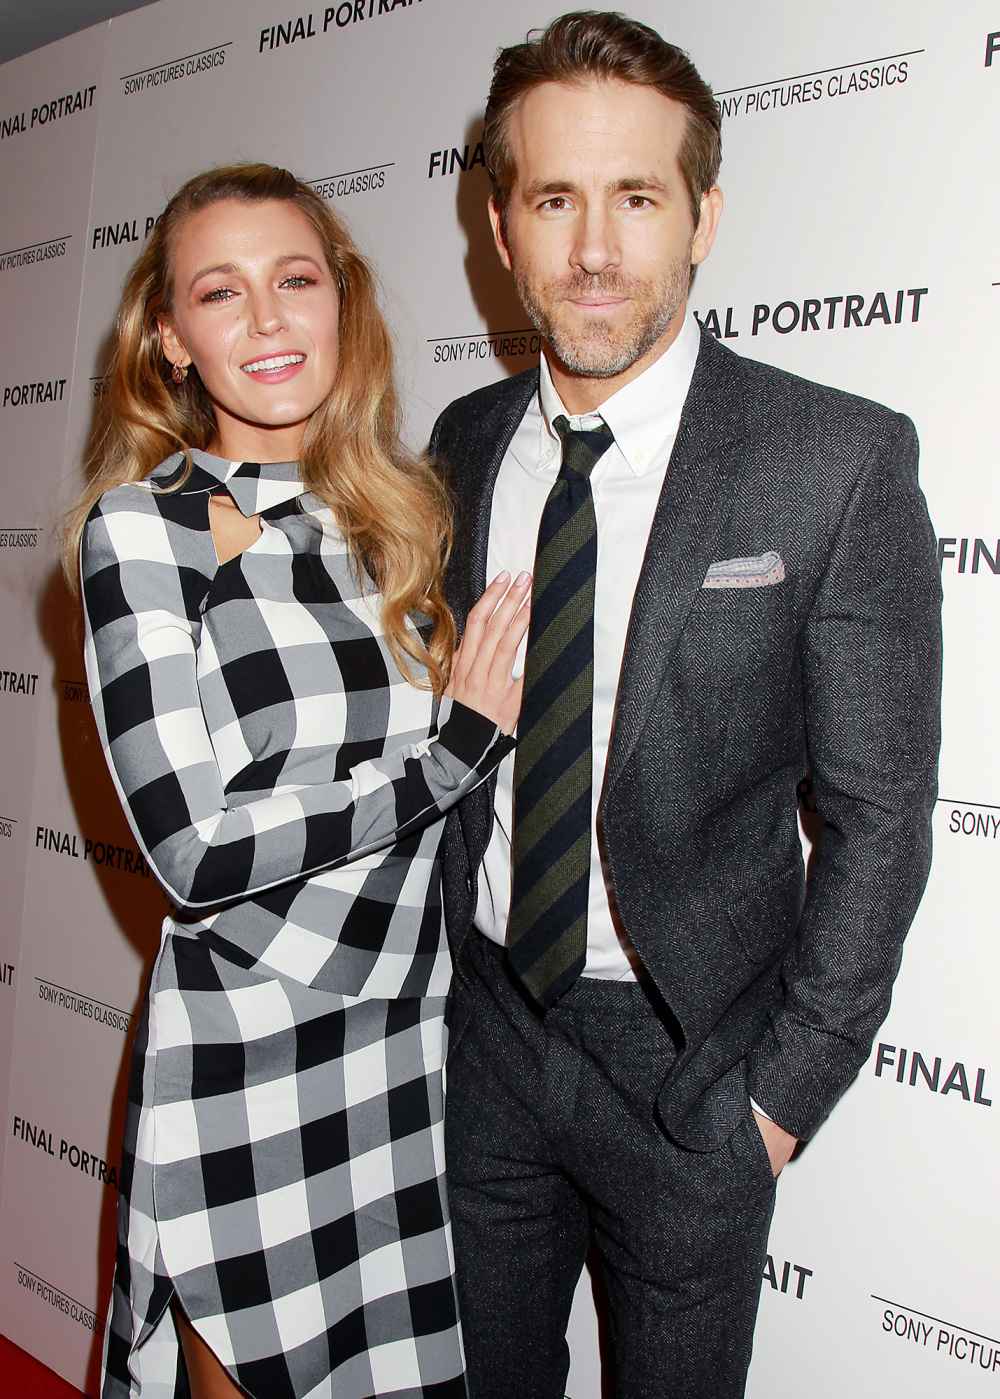 Ryan Reynolds ‘Never’ Imagined He’d Have 3 Daughters With Wife Blake Lively